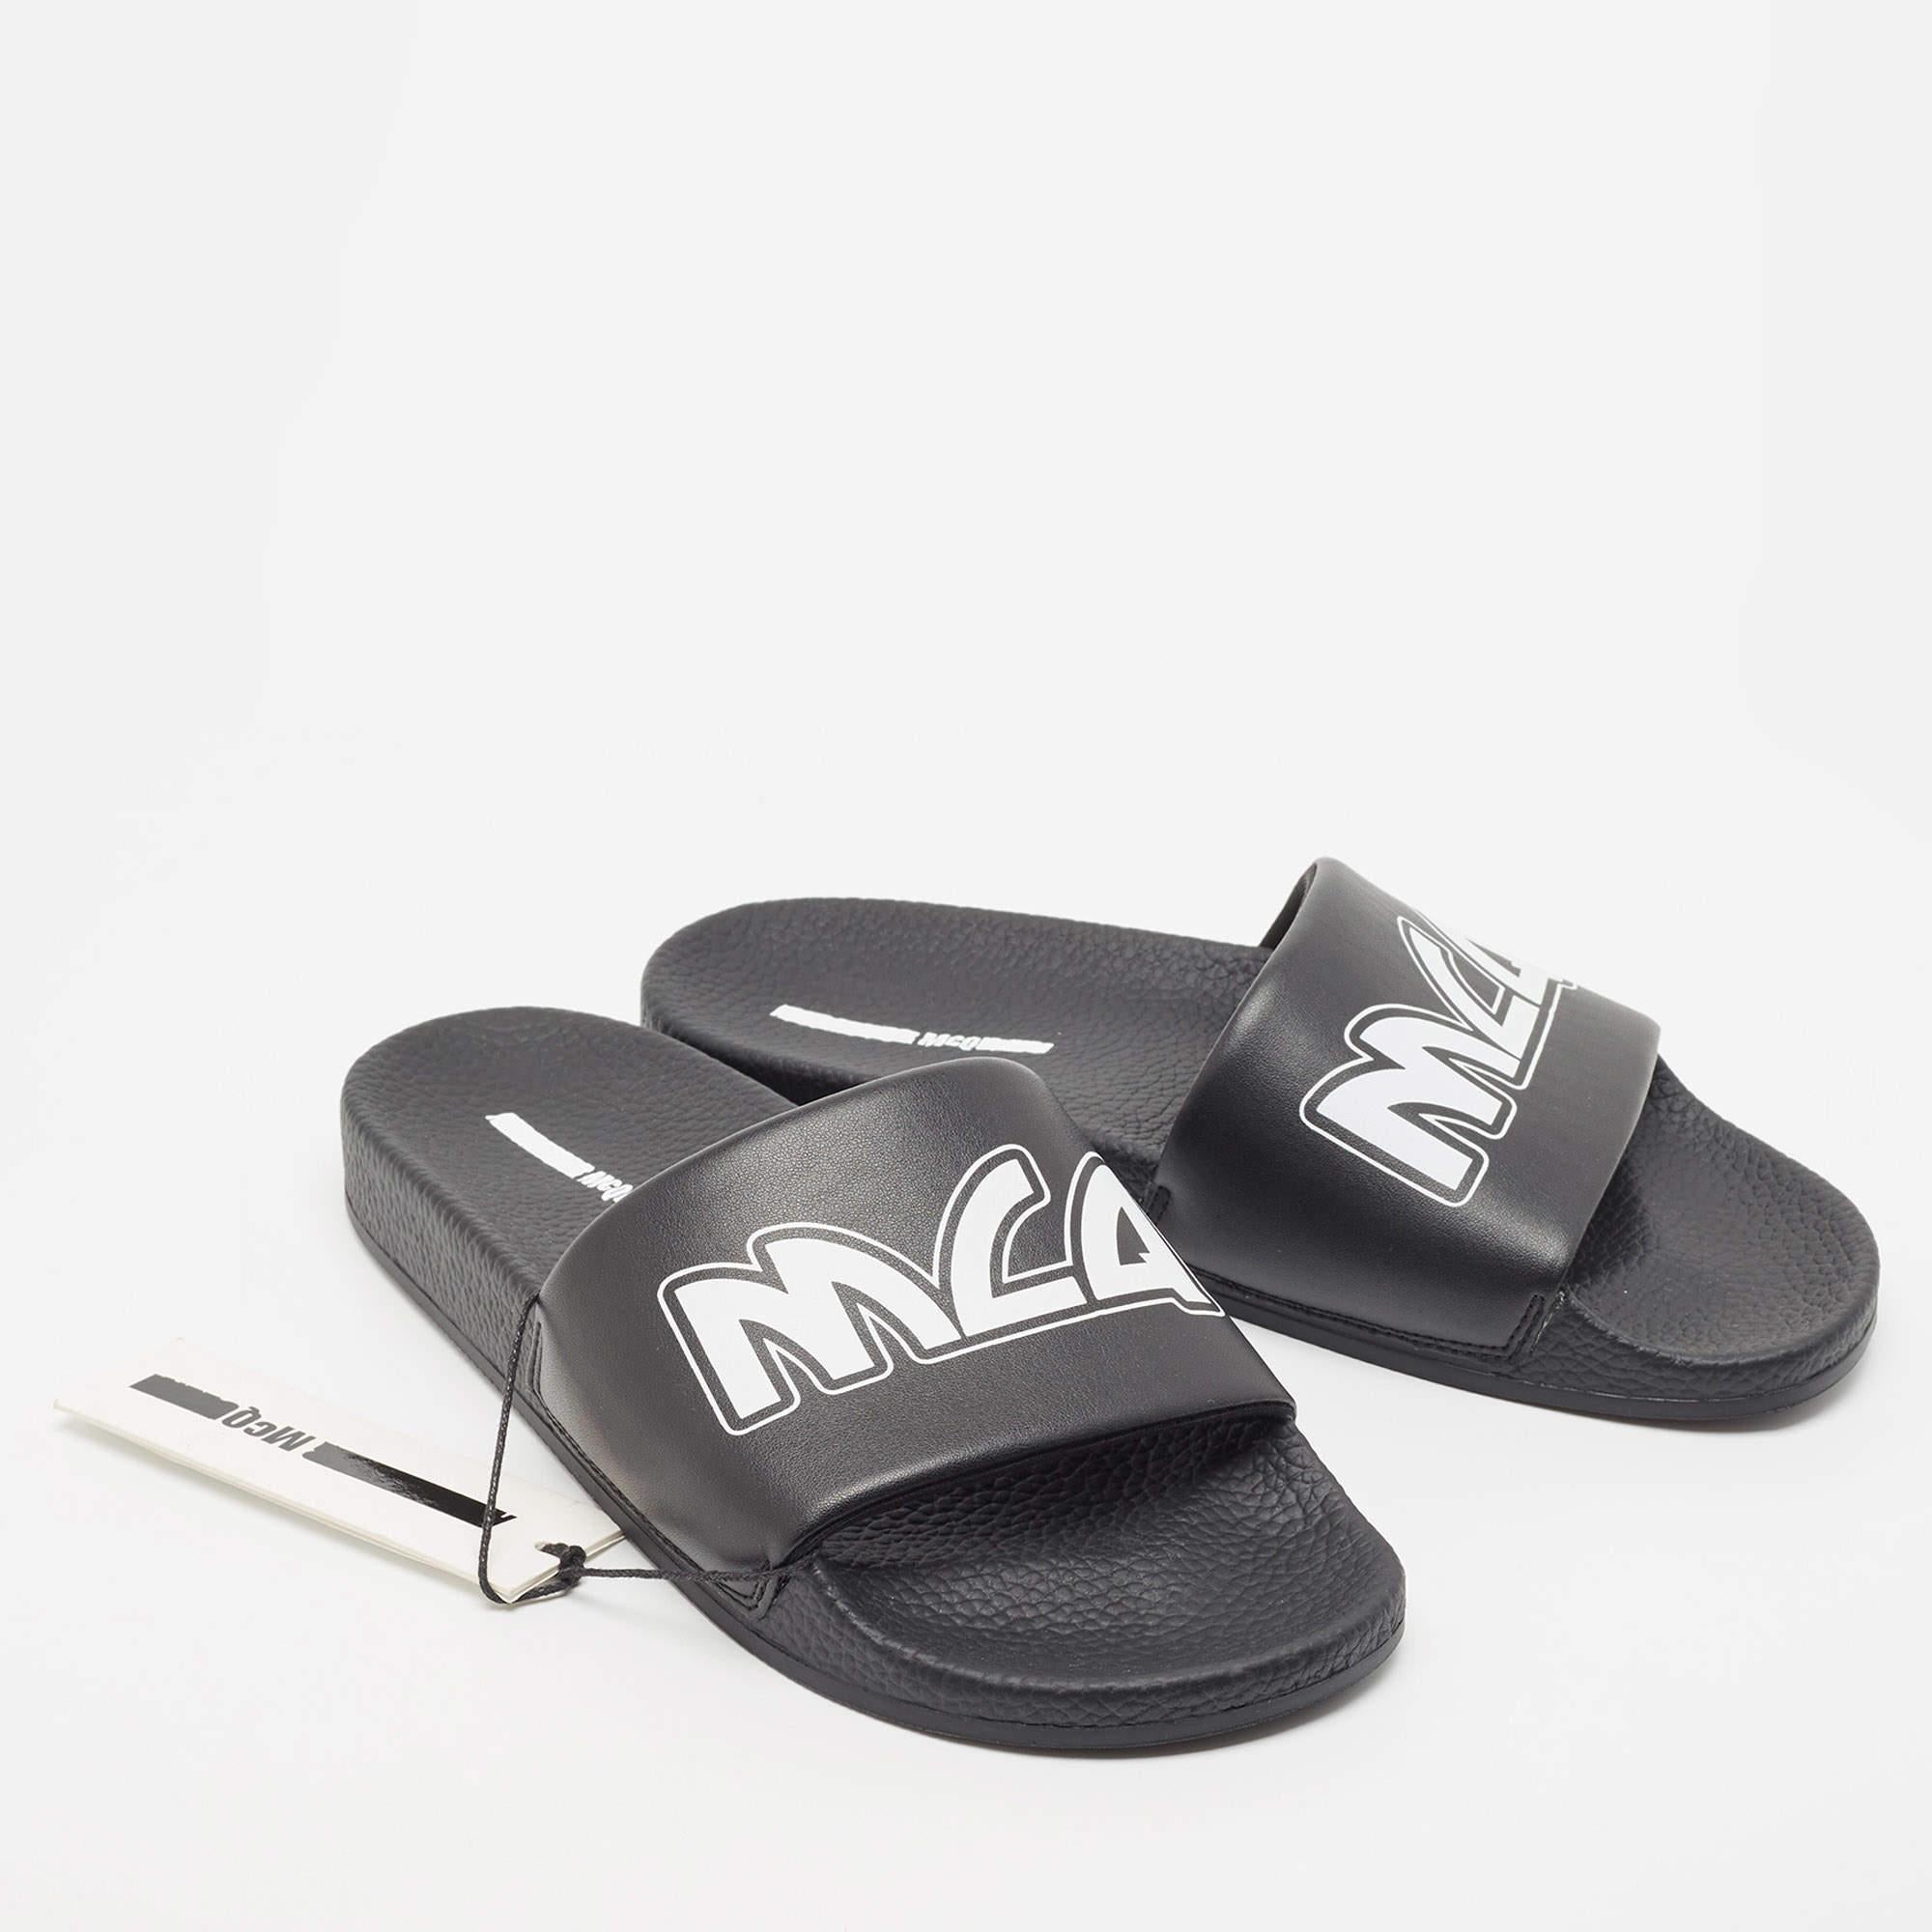 McQ by Alexander McQueen Black Leather and Rubber Logo Pool Slides Size 40 In Excellent Condition For Sale In Dubai, Al Qouz 2